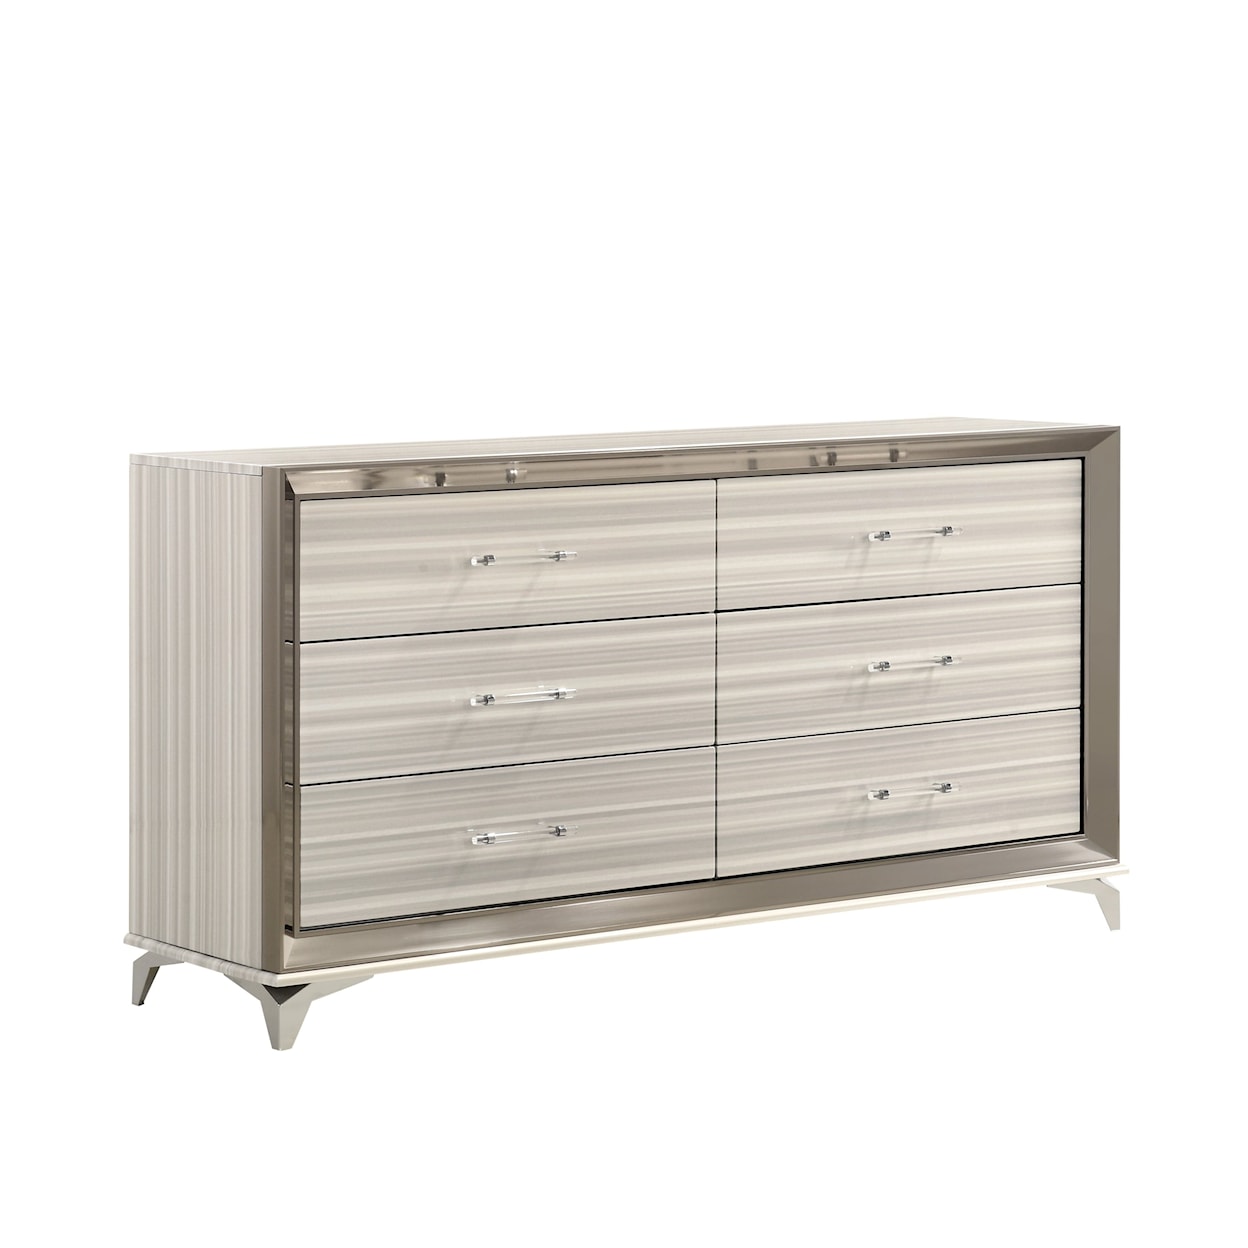 Global Furniture Zambrano White 6-Drawer Dresser with Metal Accents